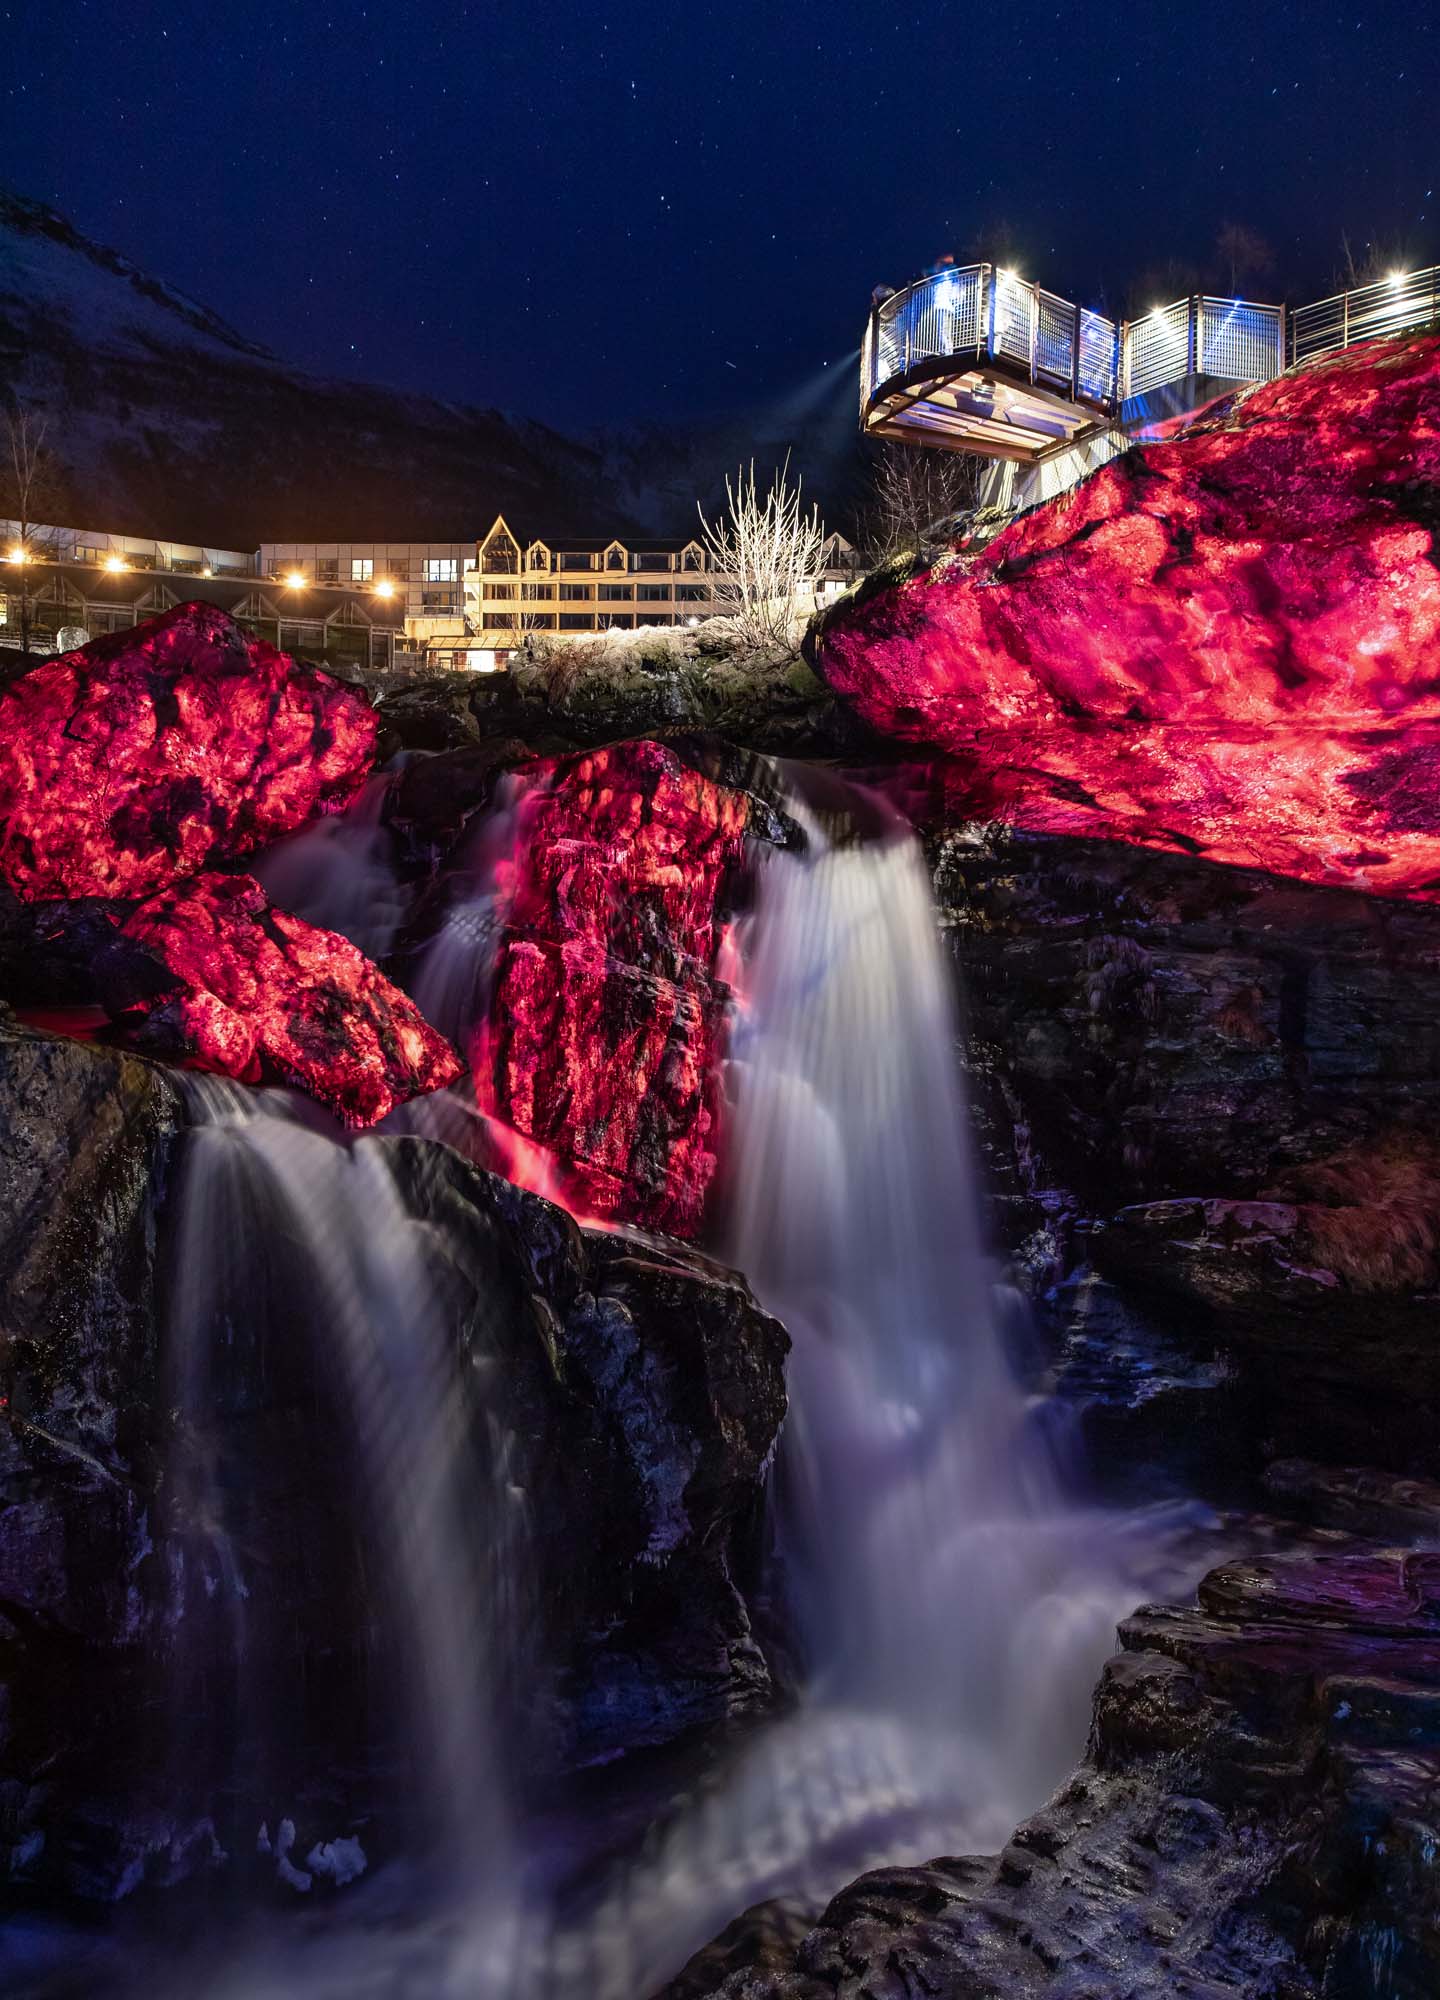 Red lava visuals video projection onto rocks near a waterfall at Geiranger Fjord